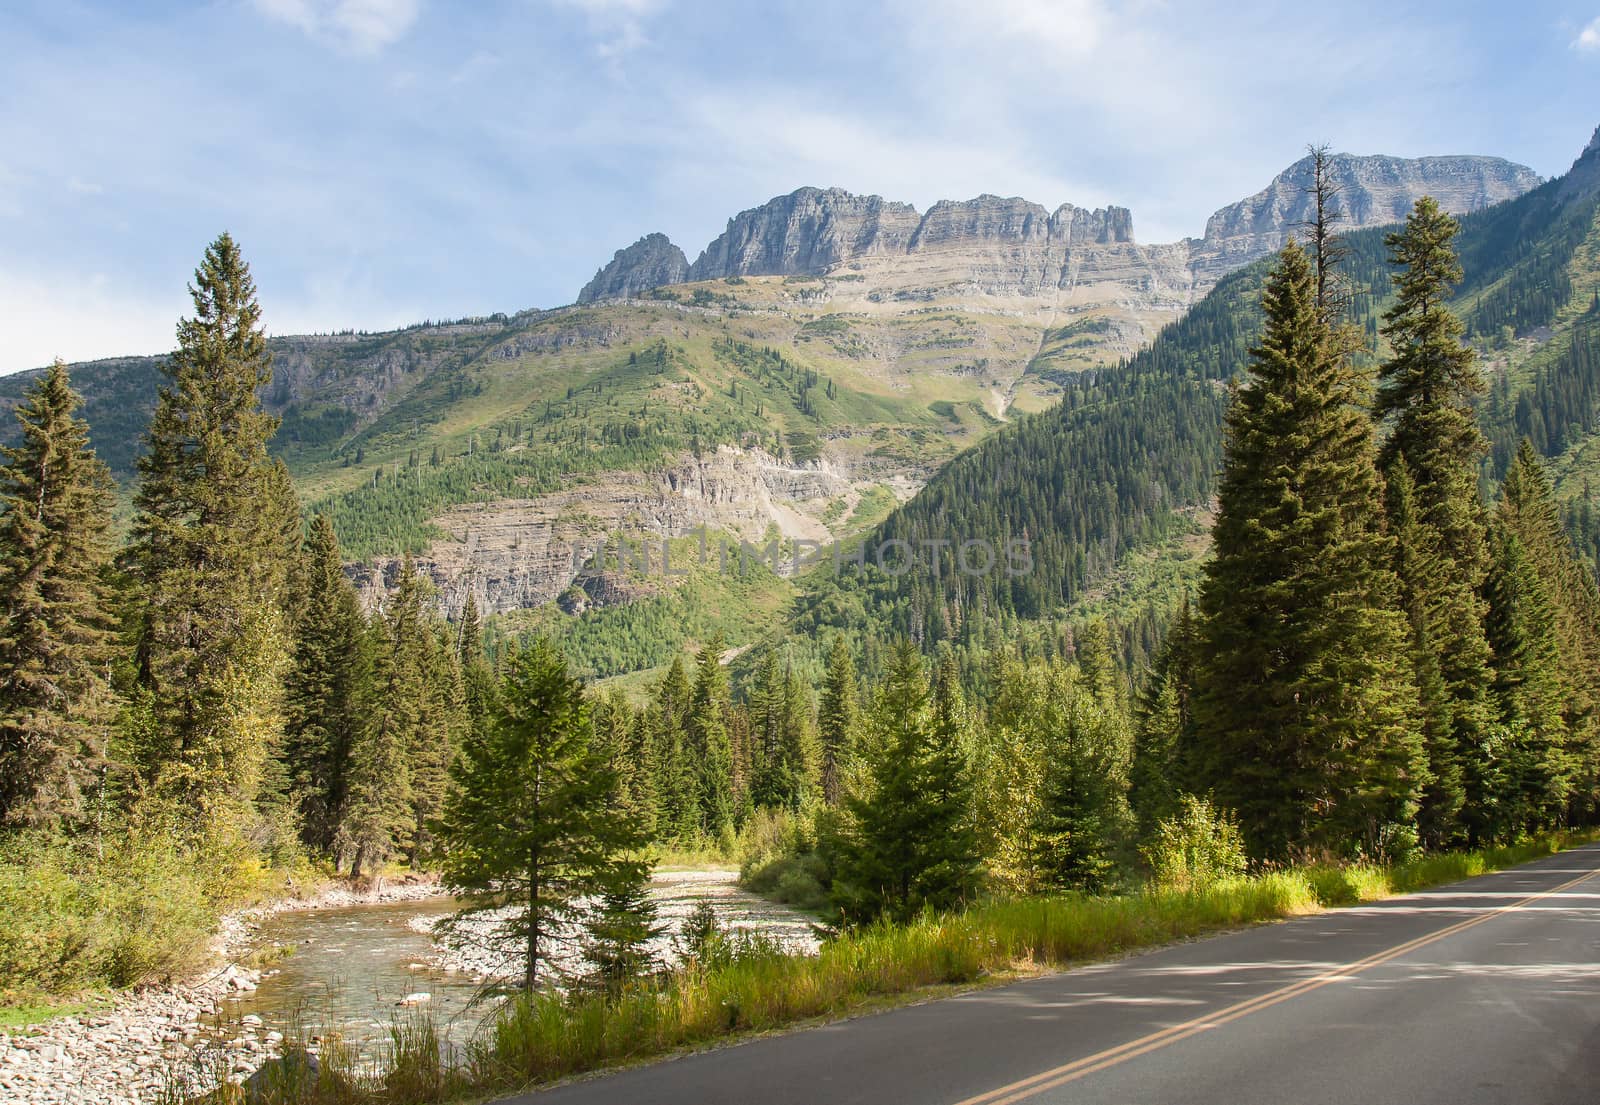 This image shows the view of Garden Wall while driving through Glacier National Park in Montana.